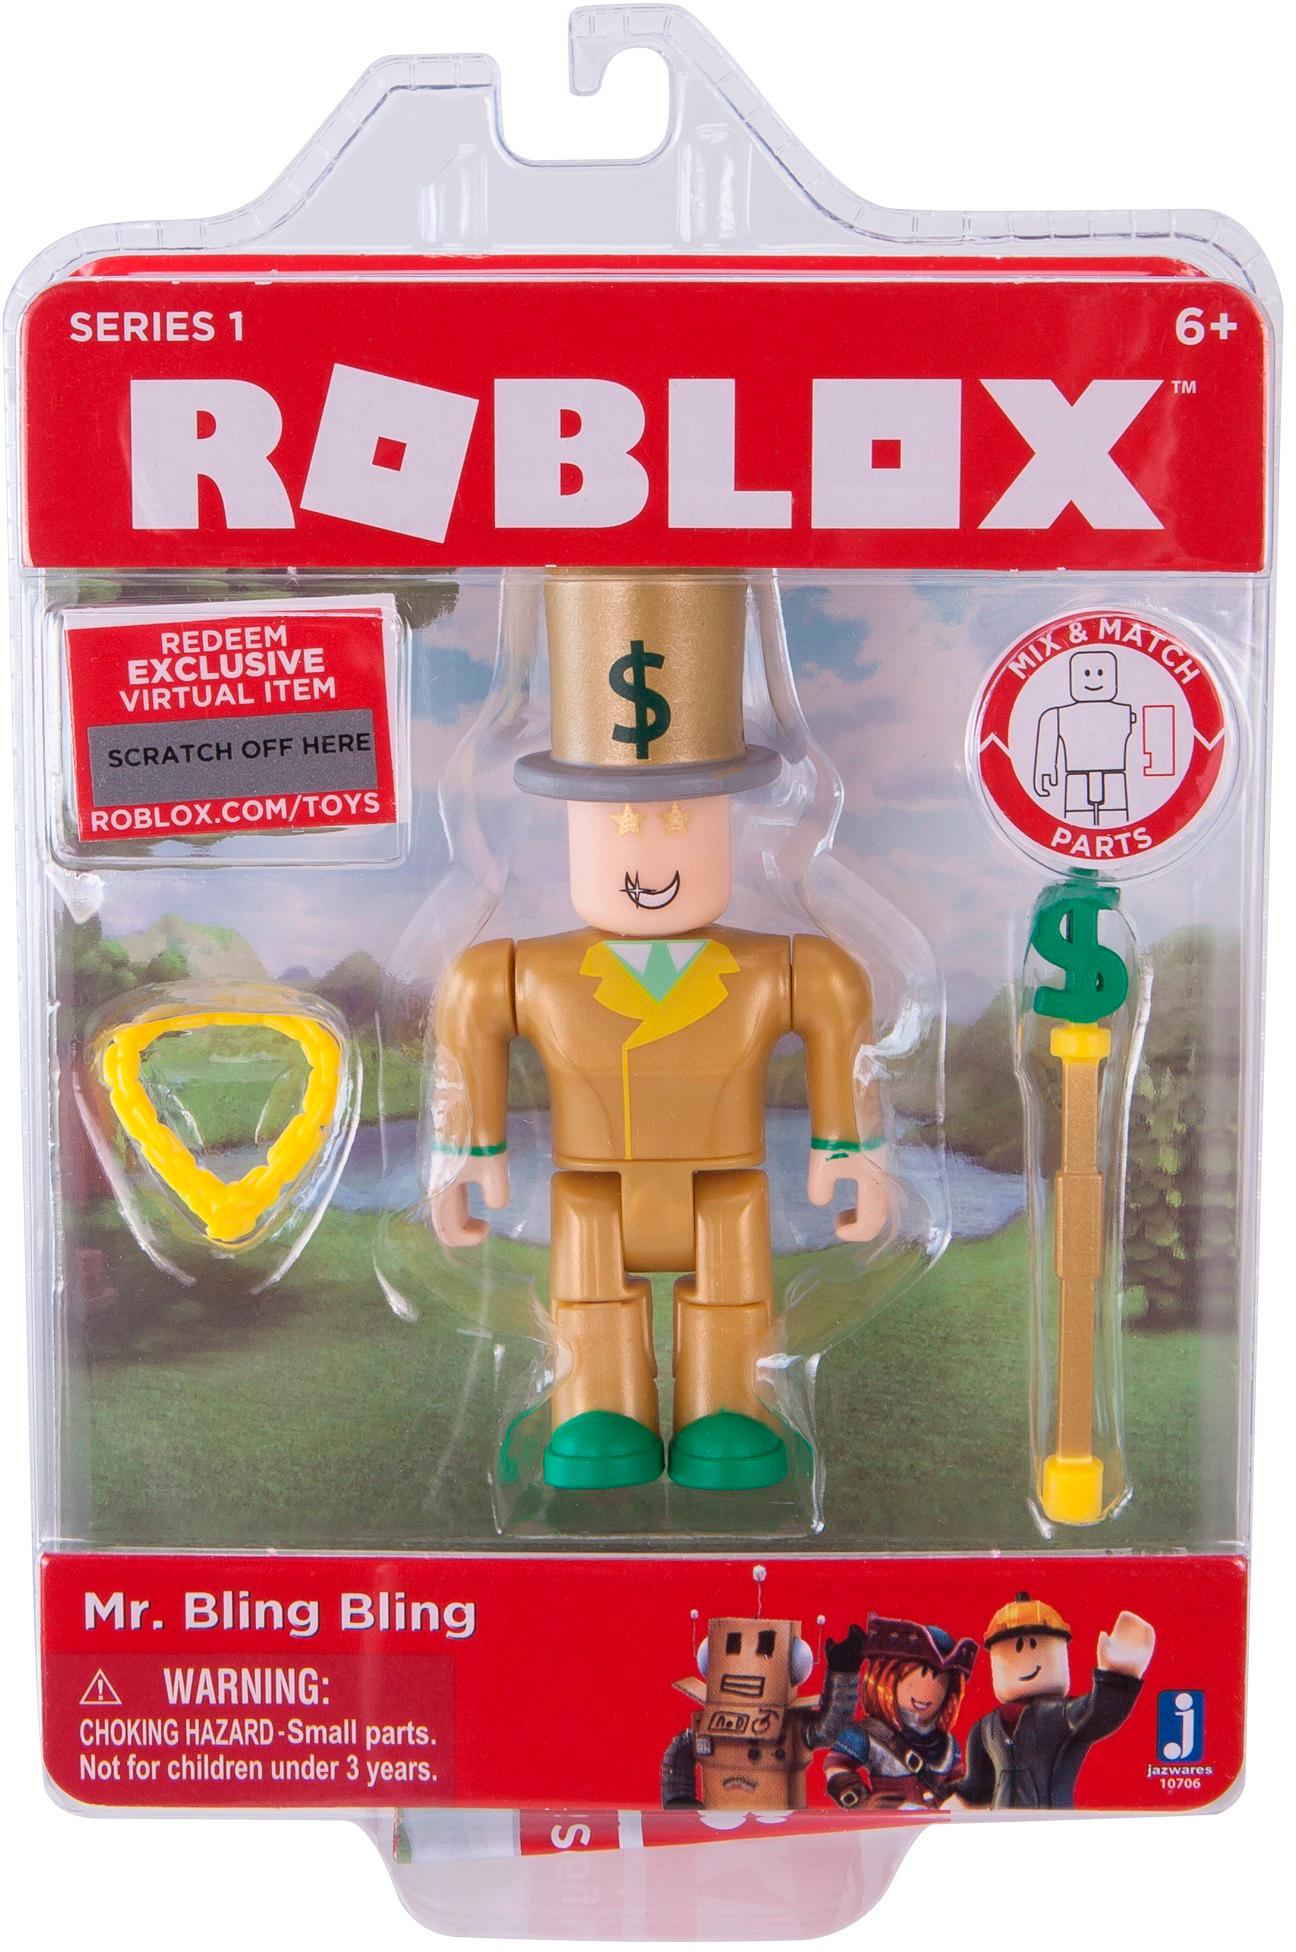 Customer Reviews Roblox Core Figure Styles May Vary 10705 Best Buy - jazwares roblox imagination articulated figure styles may vary rob0268 best buy